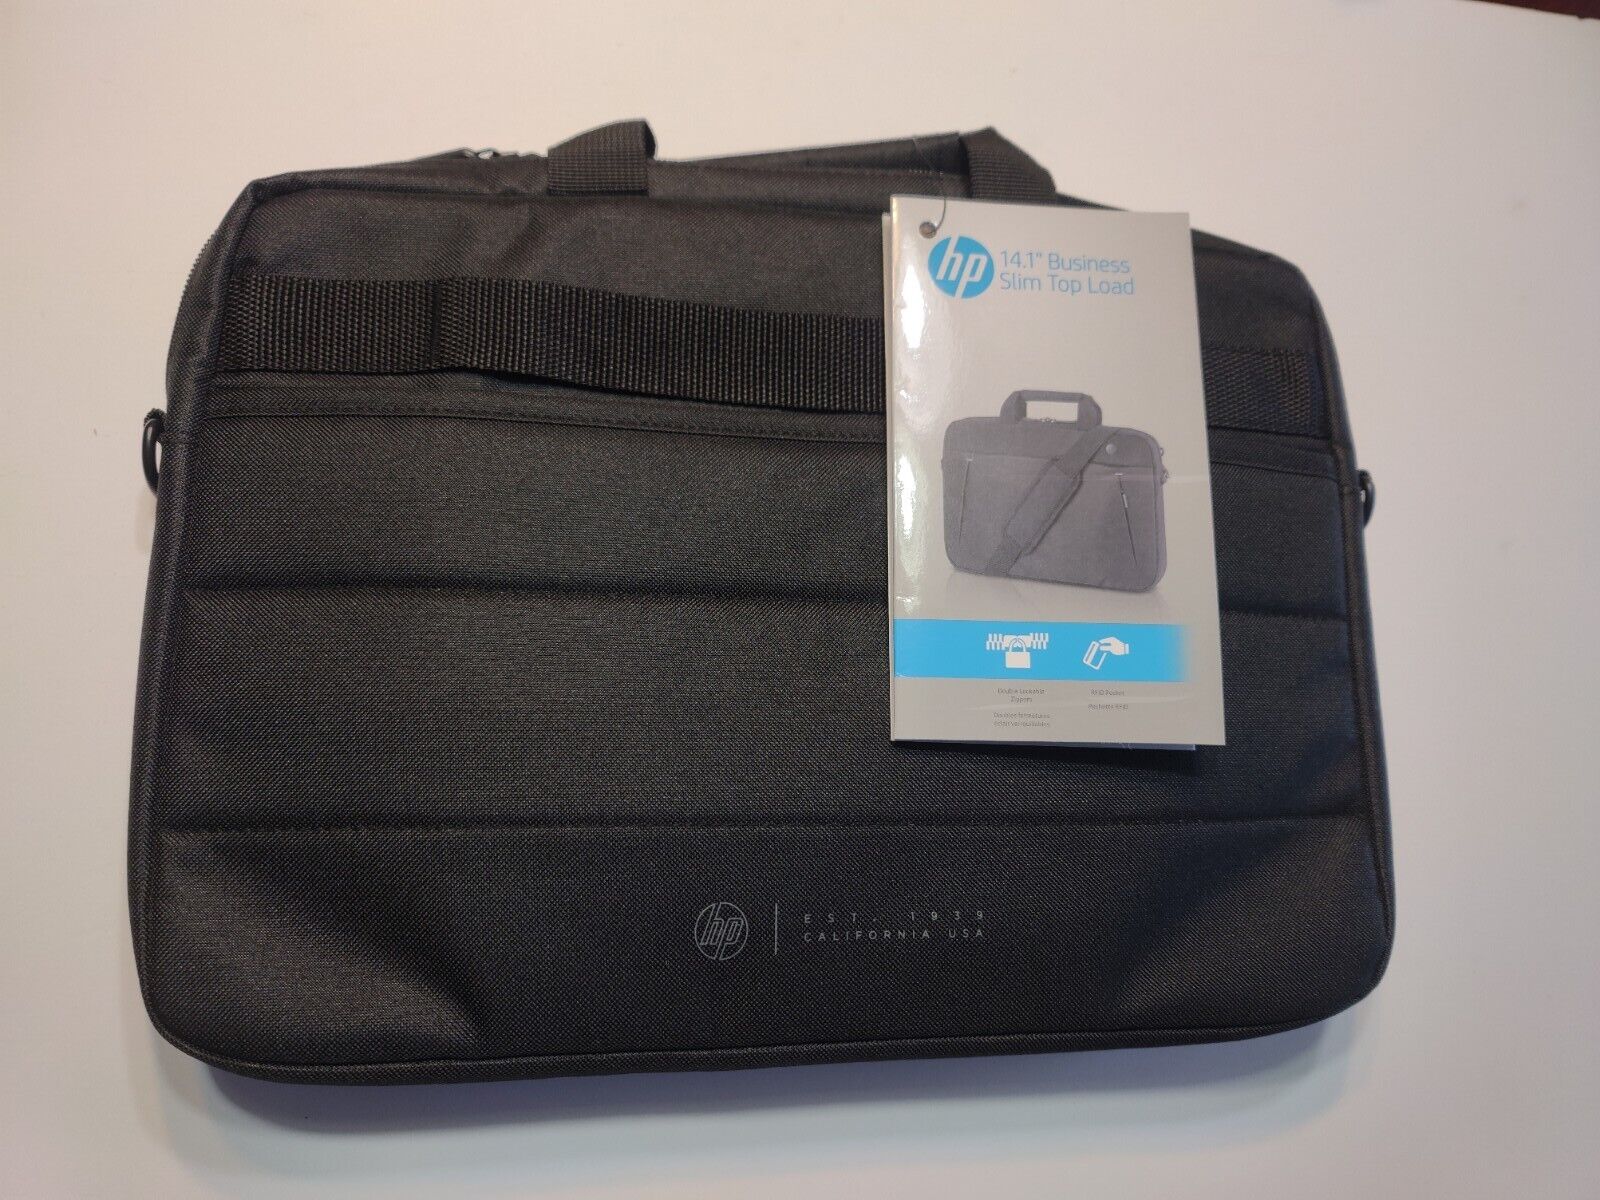 HP Business Slim Top Load Carrying Case for 14.1